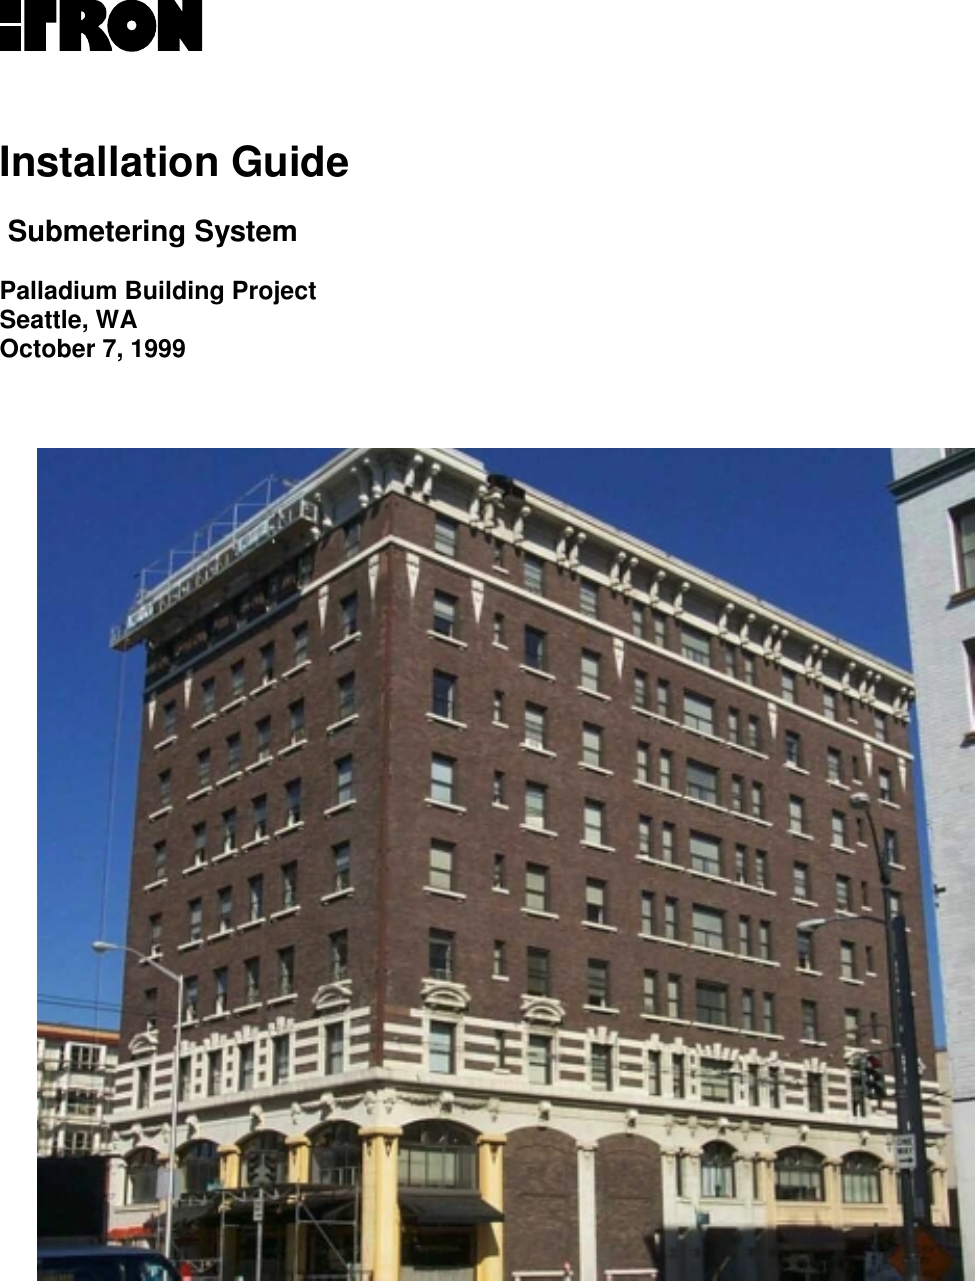 Installation Guide Submetering SystemPalladium Building ProjectSeattle, WAOctober 7, 1999